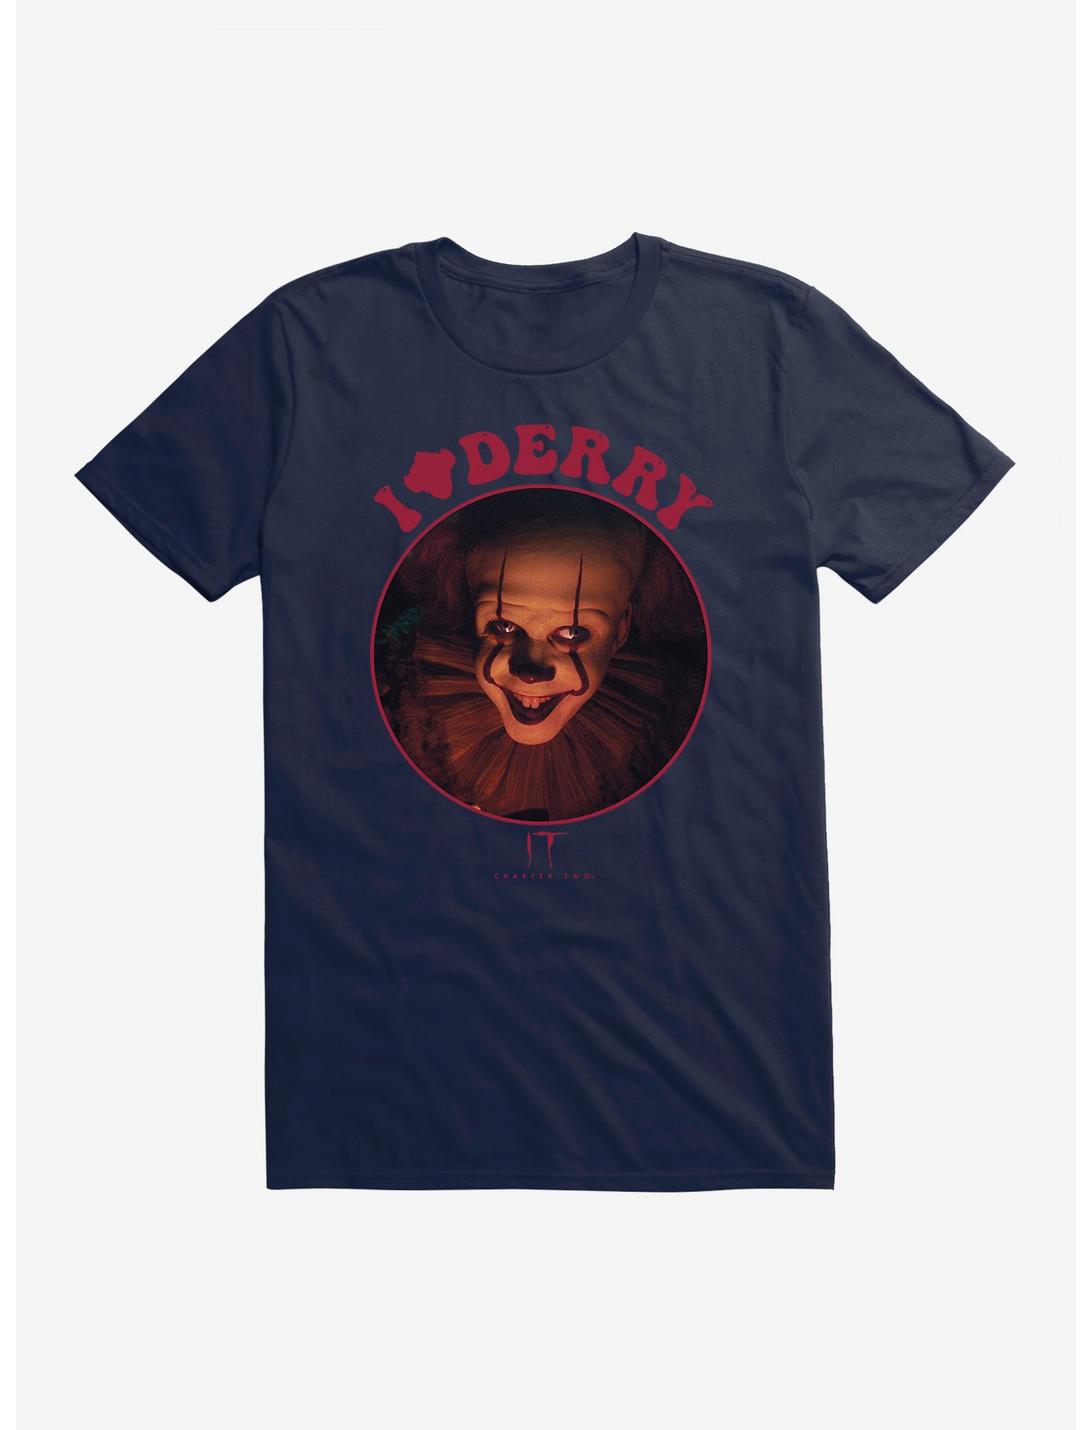 IT Chapter Two I Pennywise Derry T-Shirt, MIDNIGHT NAVY, hi-res